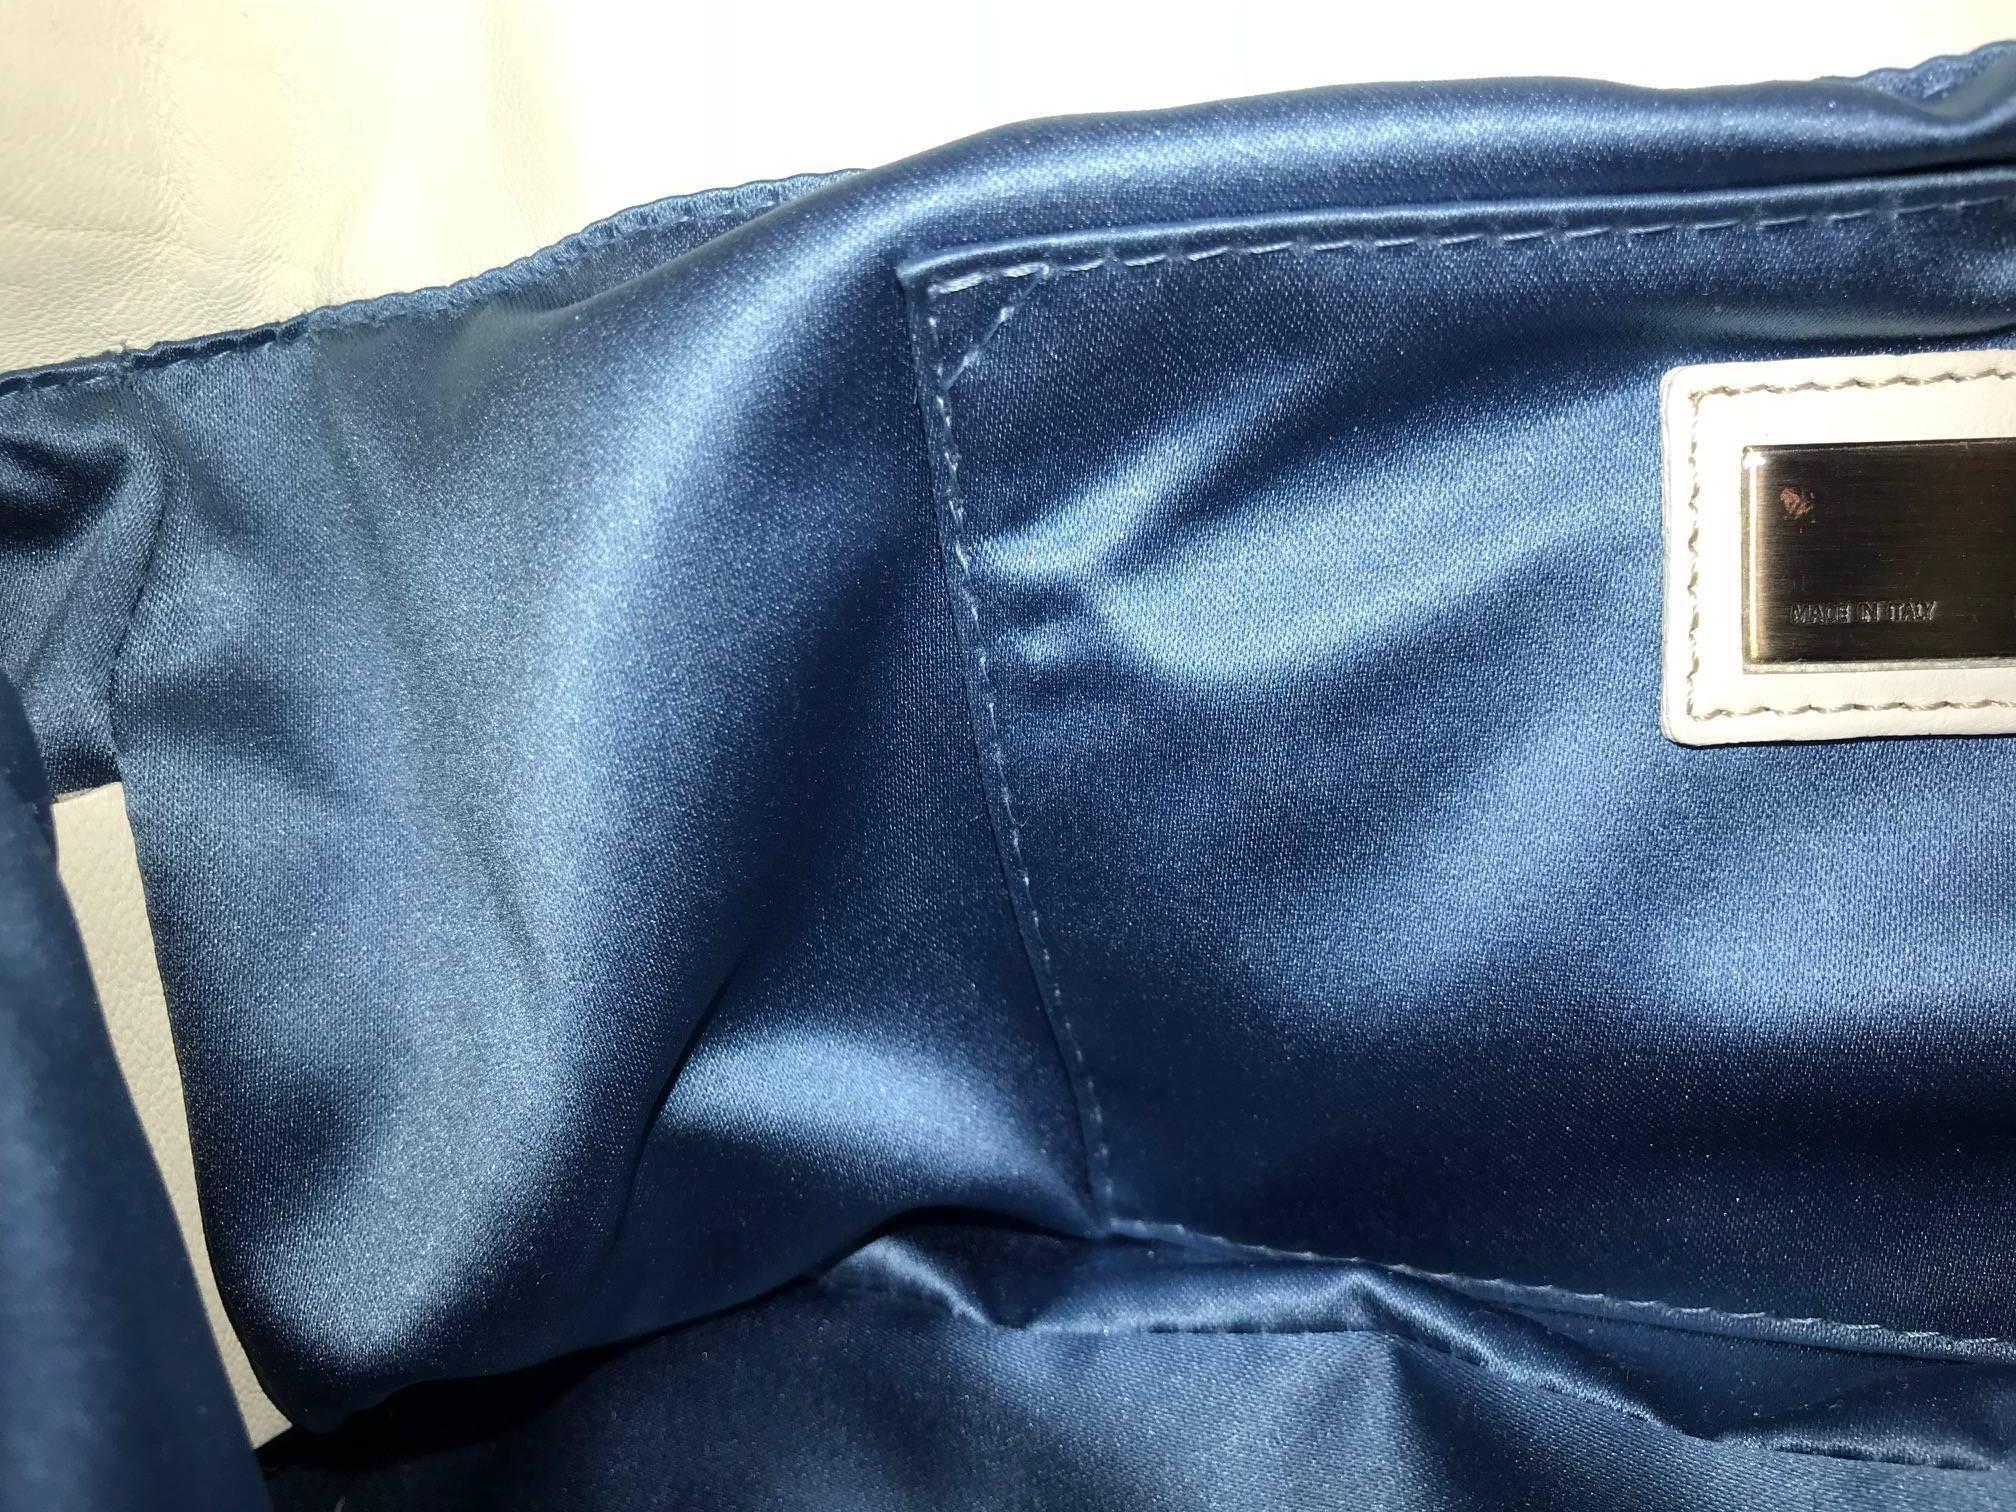  Fendi Limited Edition Leather B. Bag For Sale 3